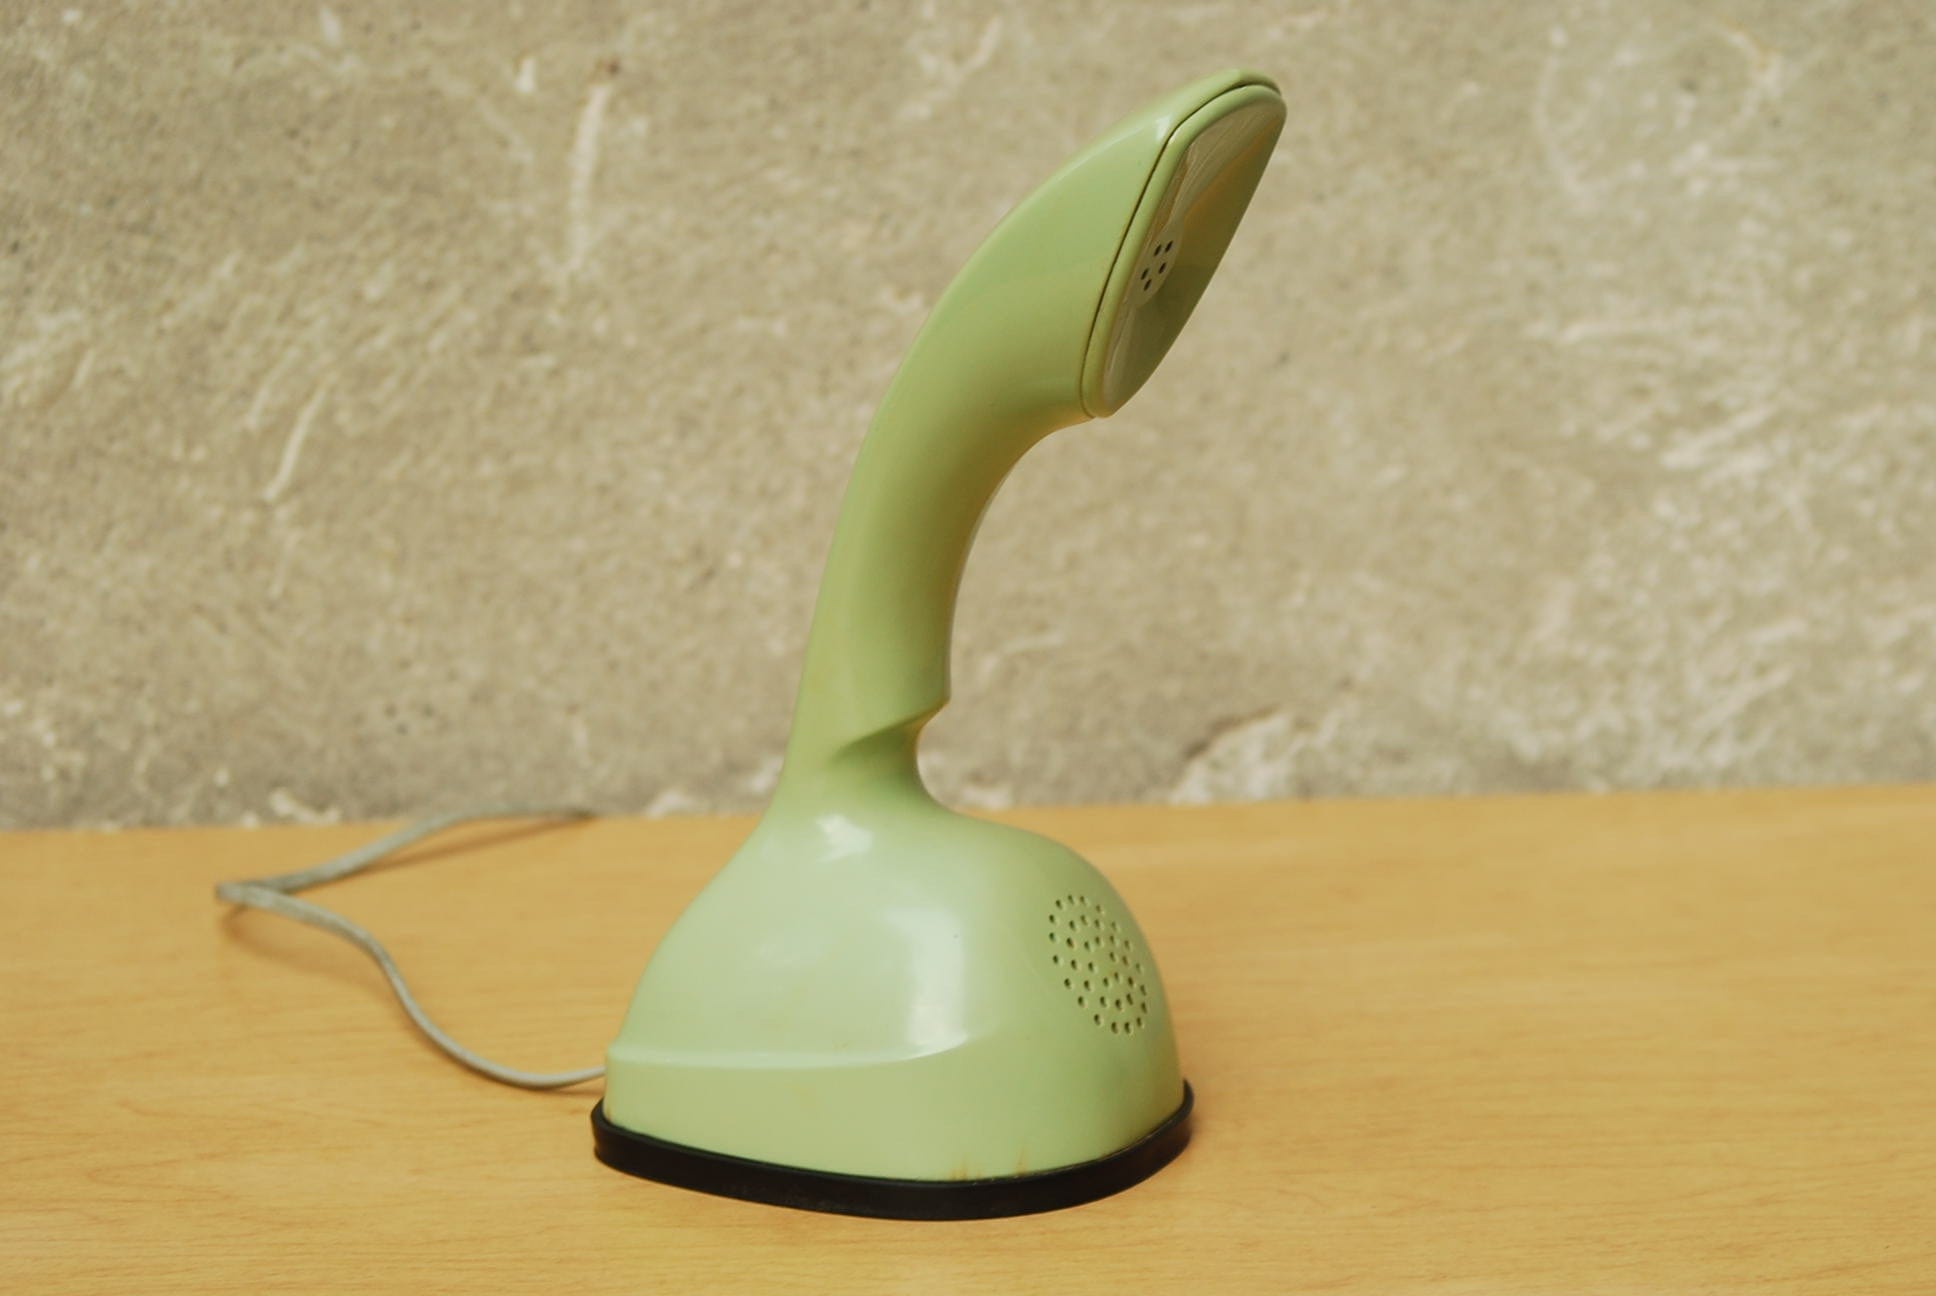 Mint Green Vintage Telephone by North Electric - I Like Mikes Modern